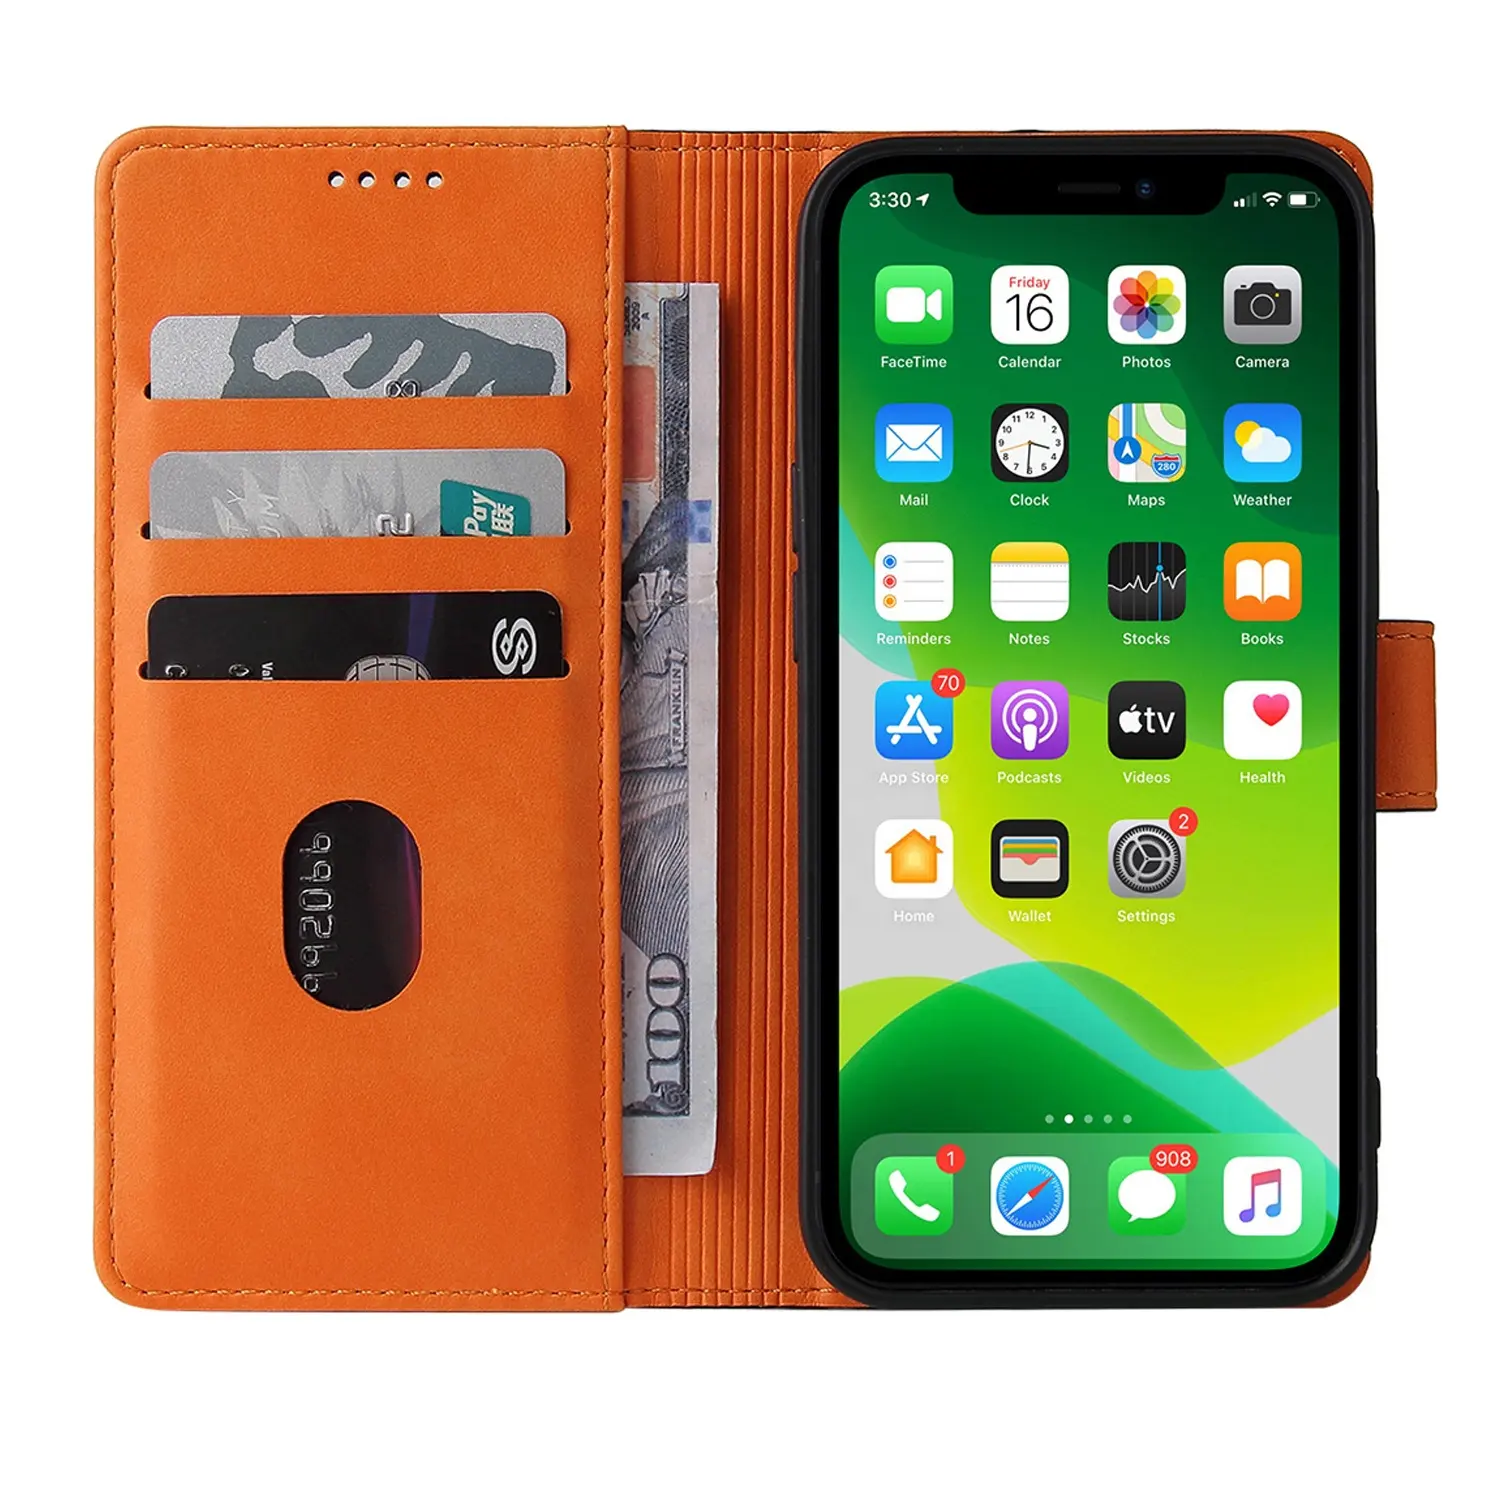 MAXUN Custom Genuine Leather For iPhone Covers Xs Max Folding Shock Proof Case 13 14 Pro Wallet Apple Original Cases Protective